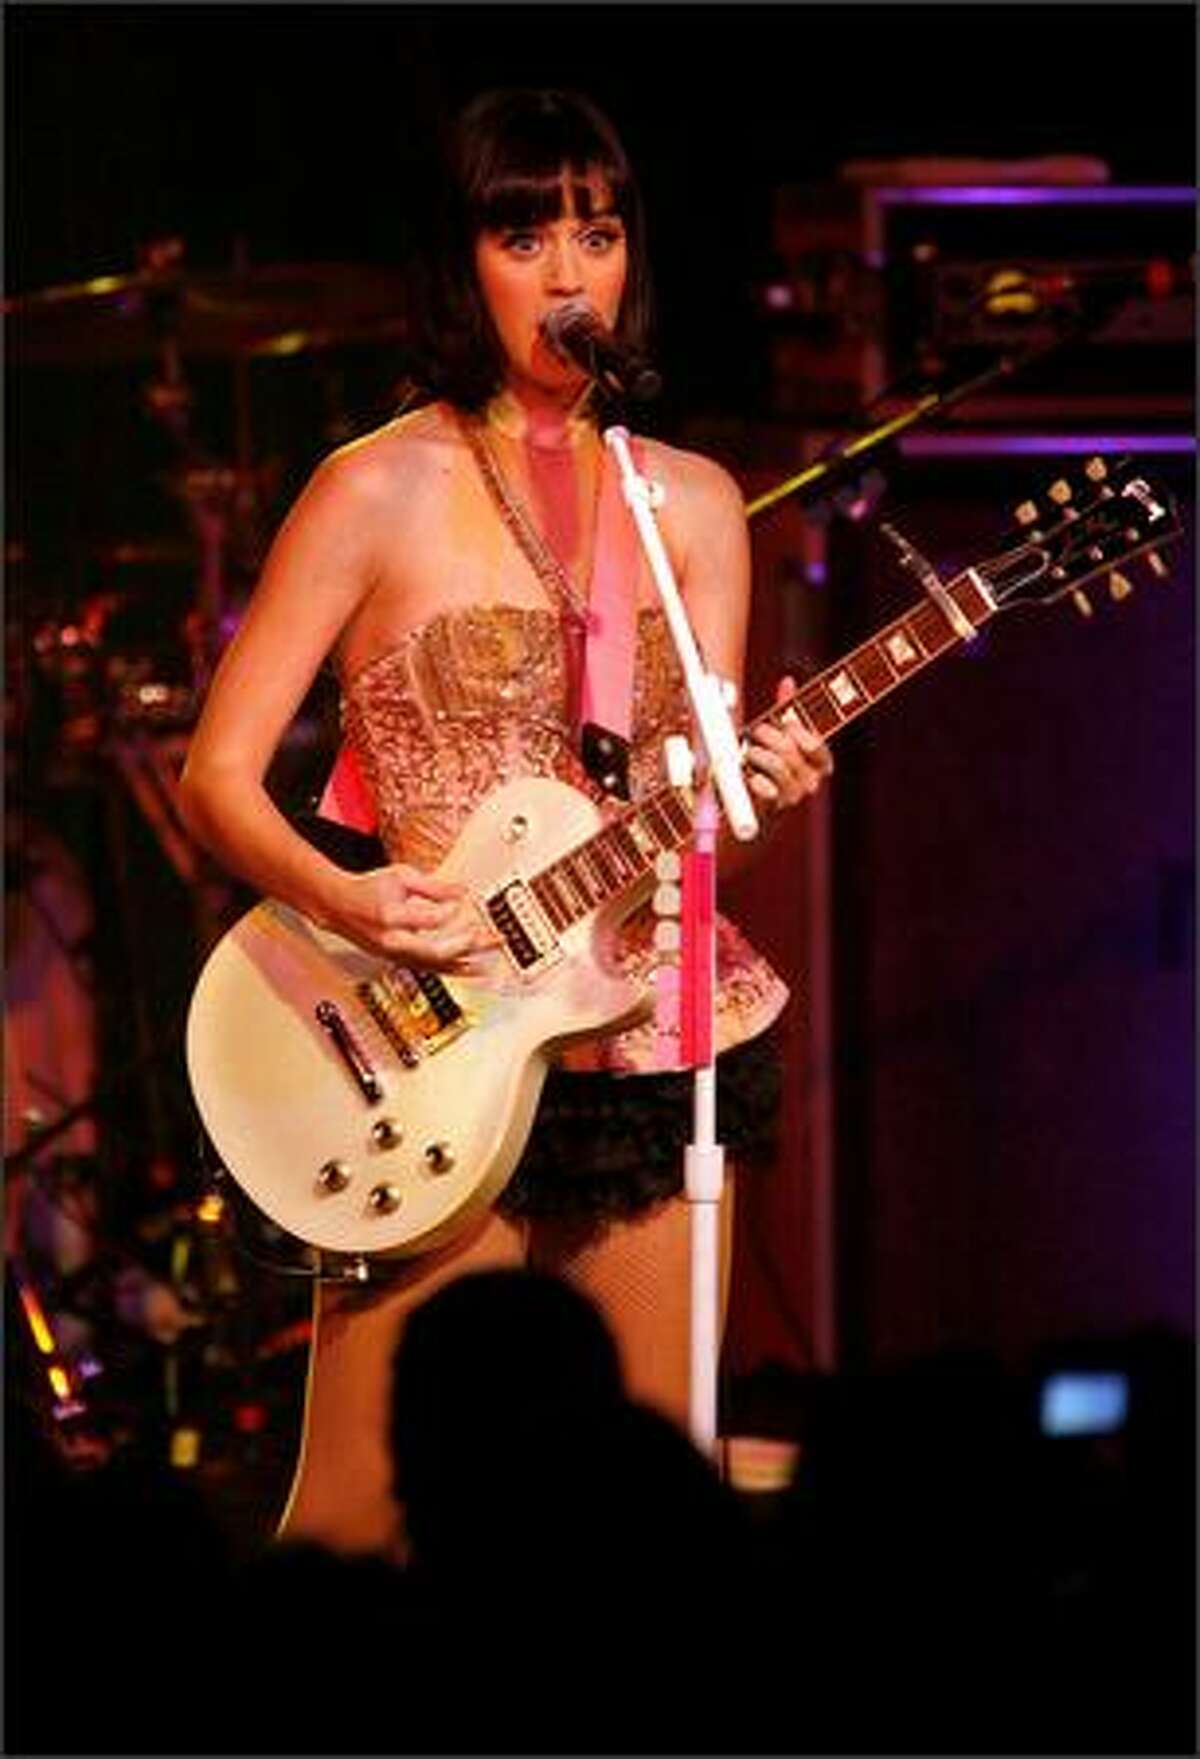 Katy Perry plays Showbox at the Market in downtown Seattle on Friday night. Perry hit it big last summer with her album "One of the Boys" and the singles "I Kissed a Girl," "Ur So Gay" and "Hot N Cold."